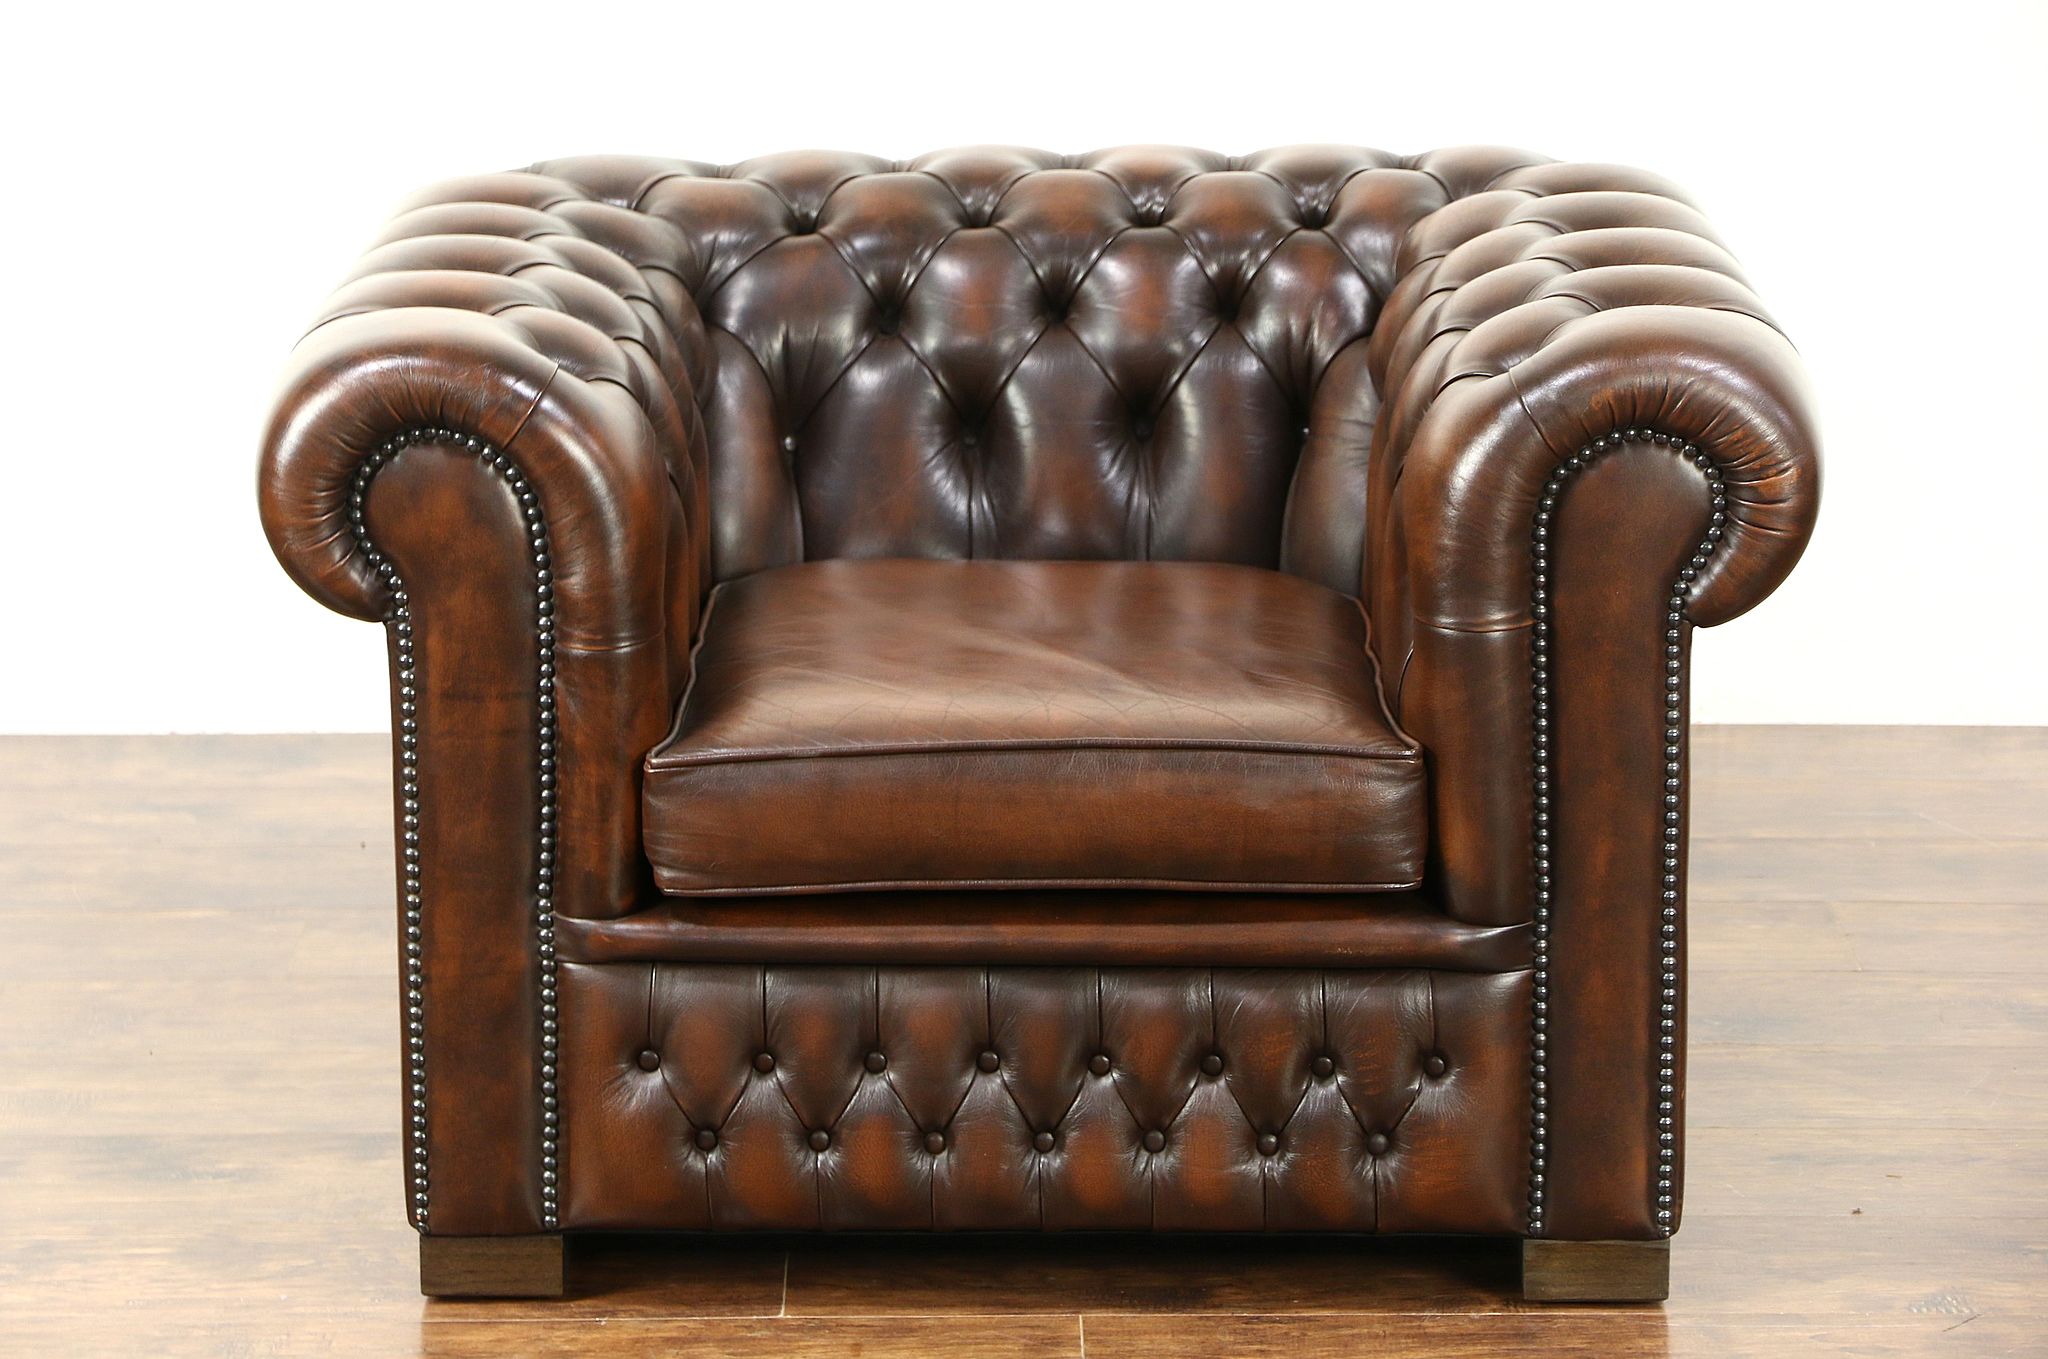 Sold Chesterfield Tufted Brown Leather Vintage Scandinavian Tub